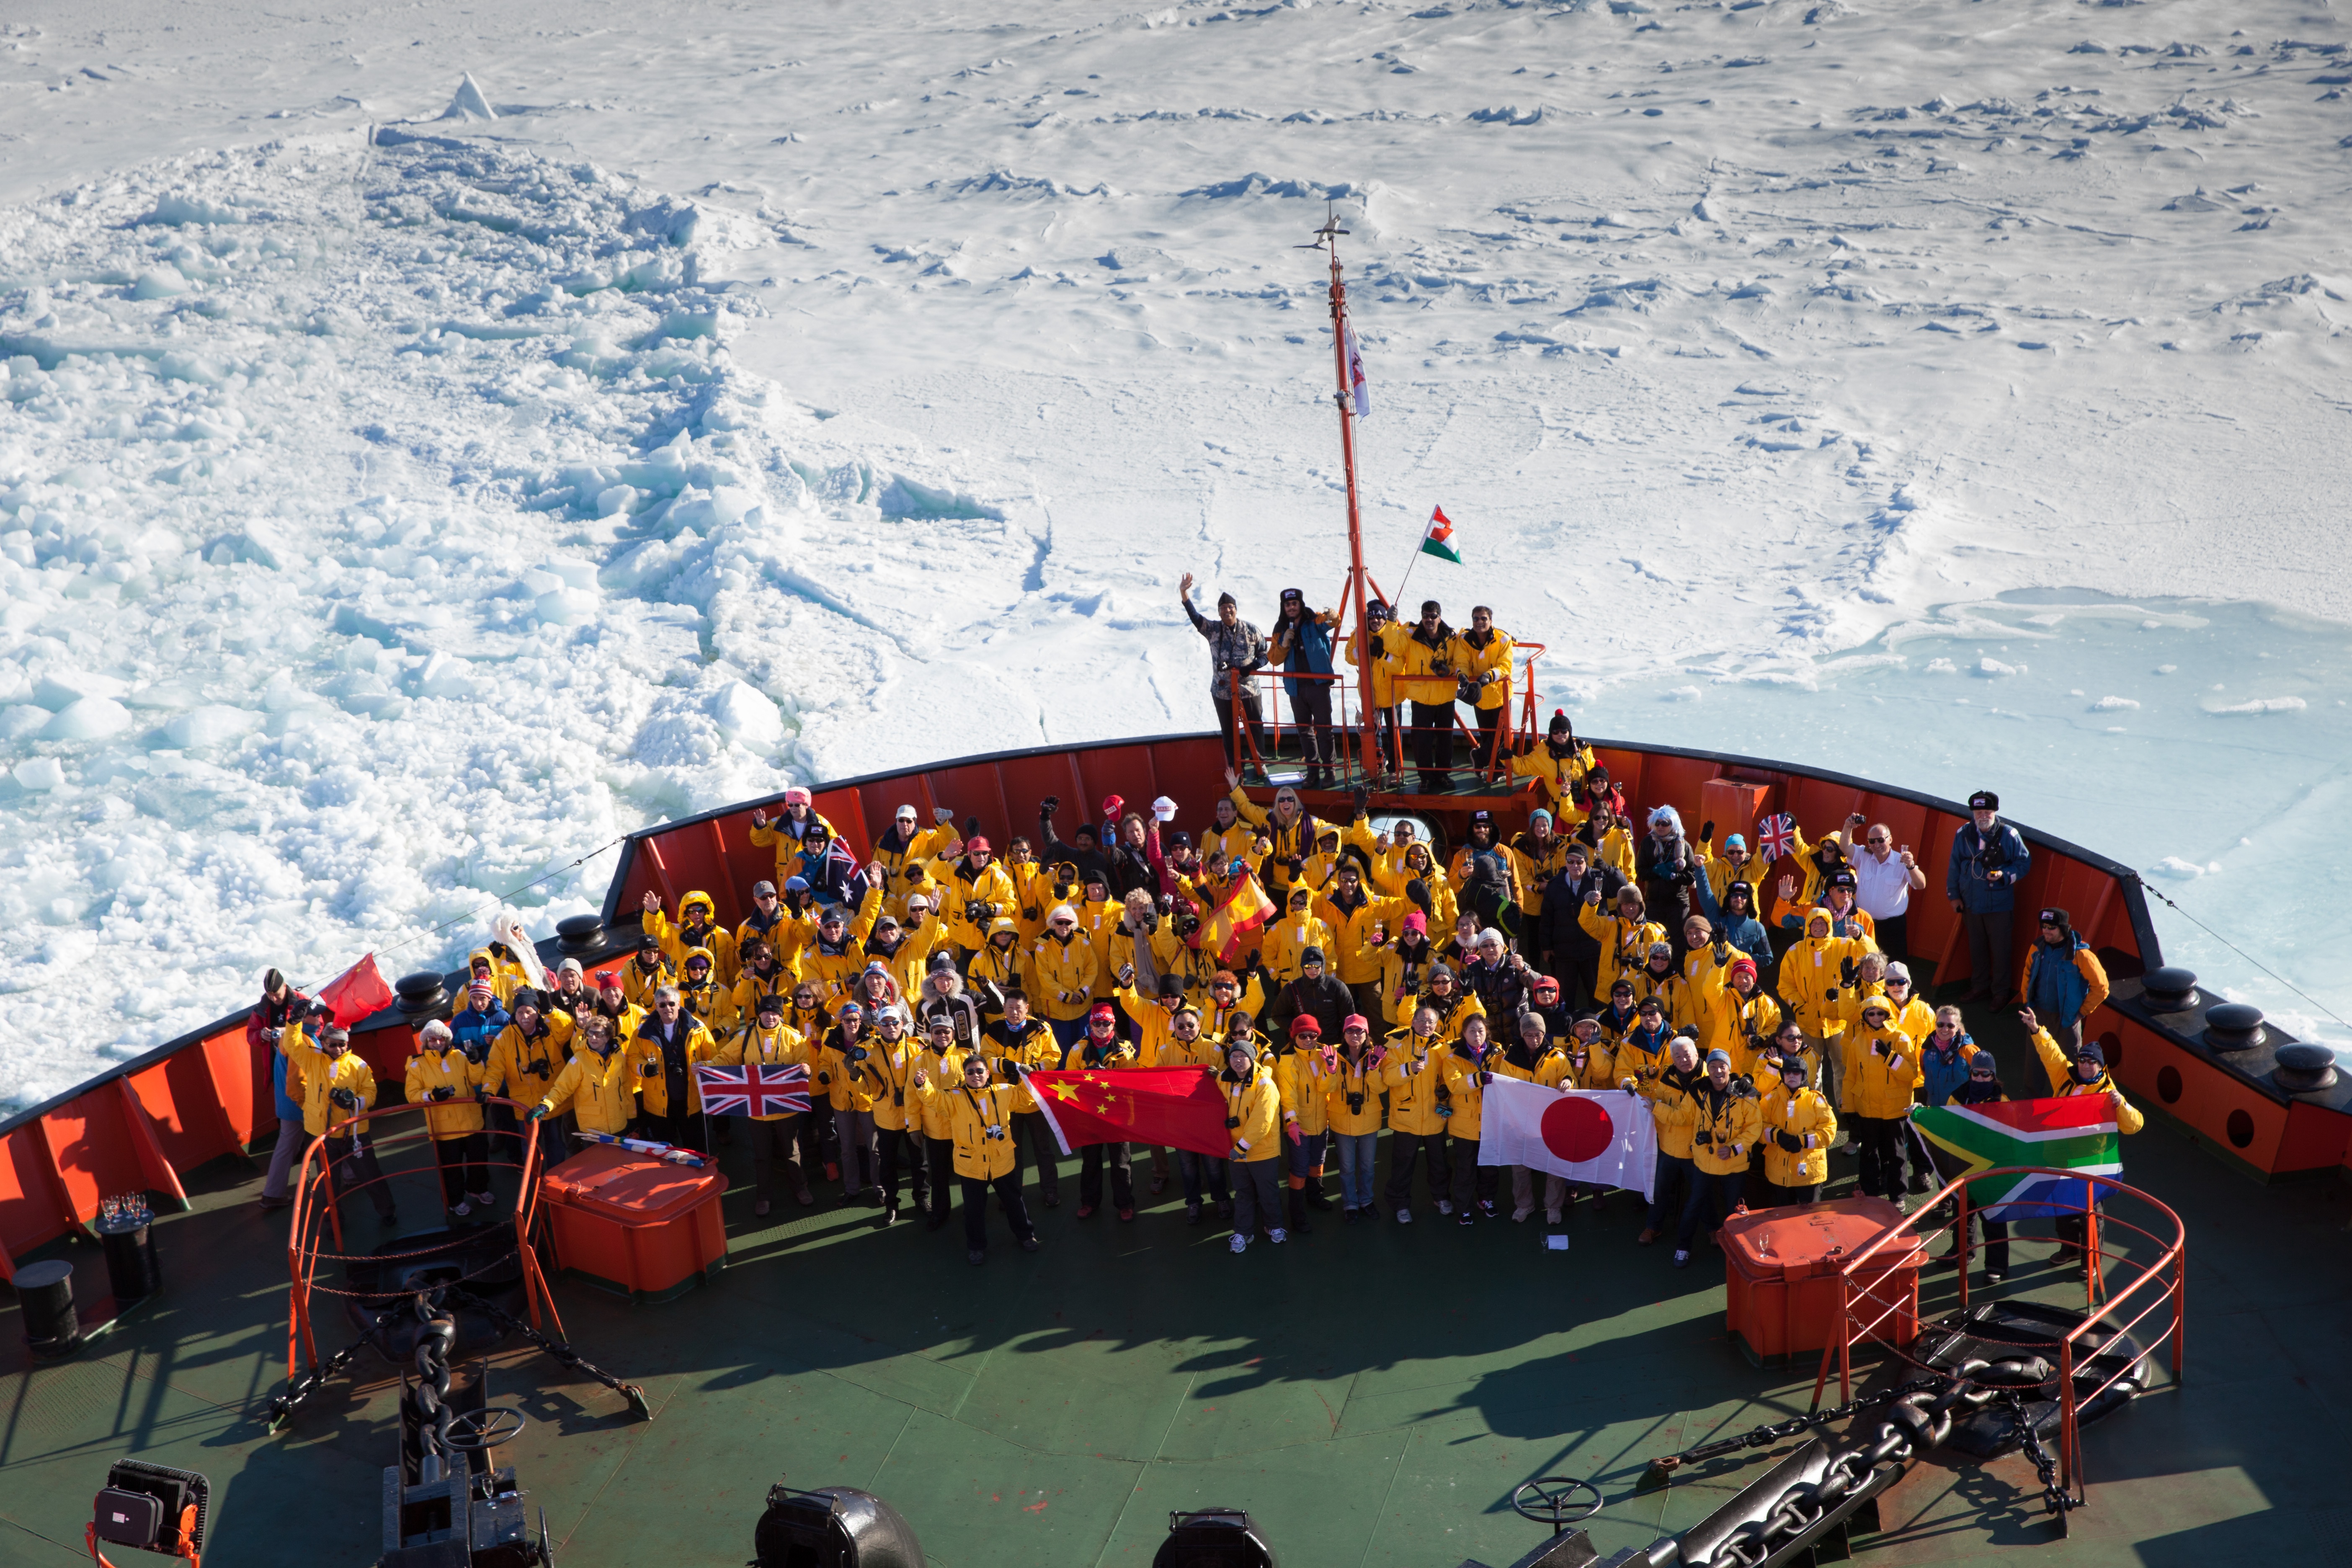 Life onboard an icebreaker en route to the North Pole is exciting and surprisingly comfortable, with open decks to enjoy the spectacle of crushing through the thick, multi-year sea ice.